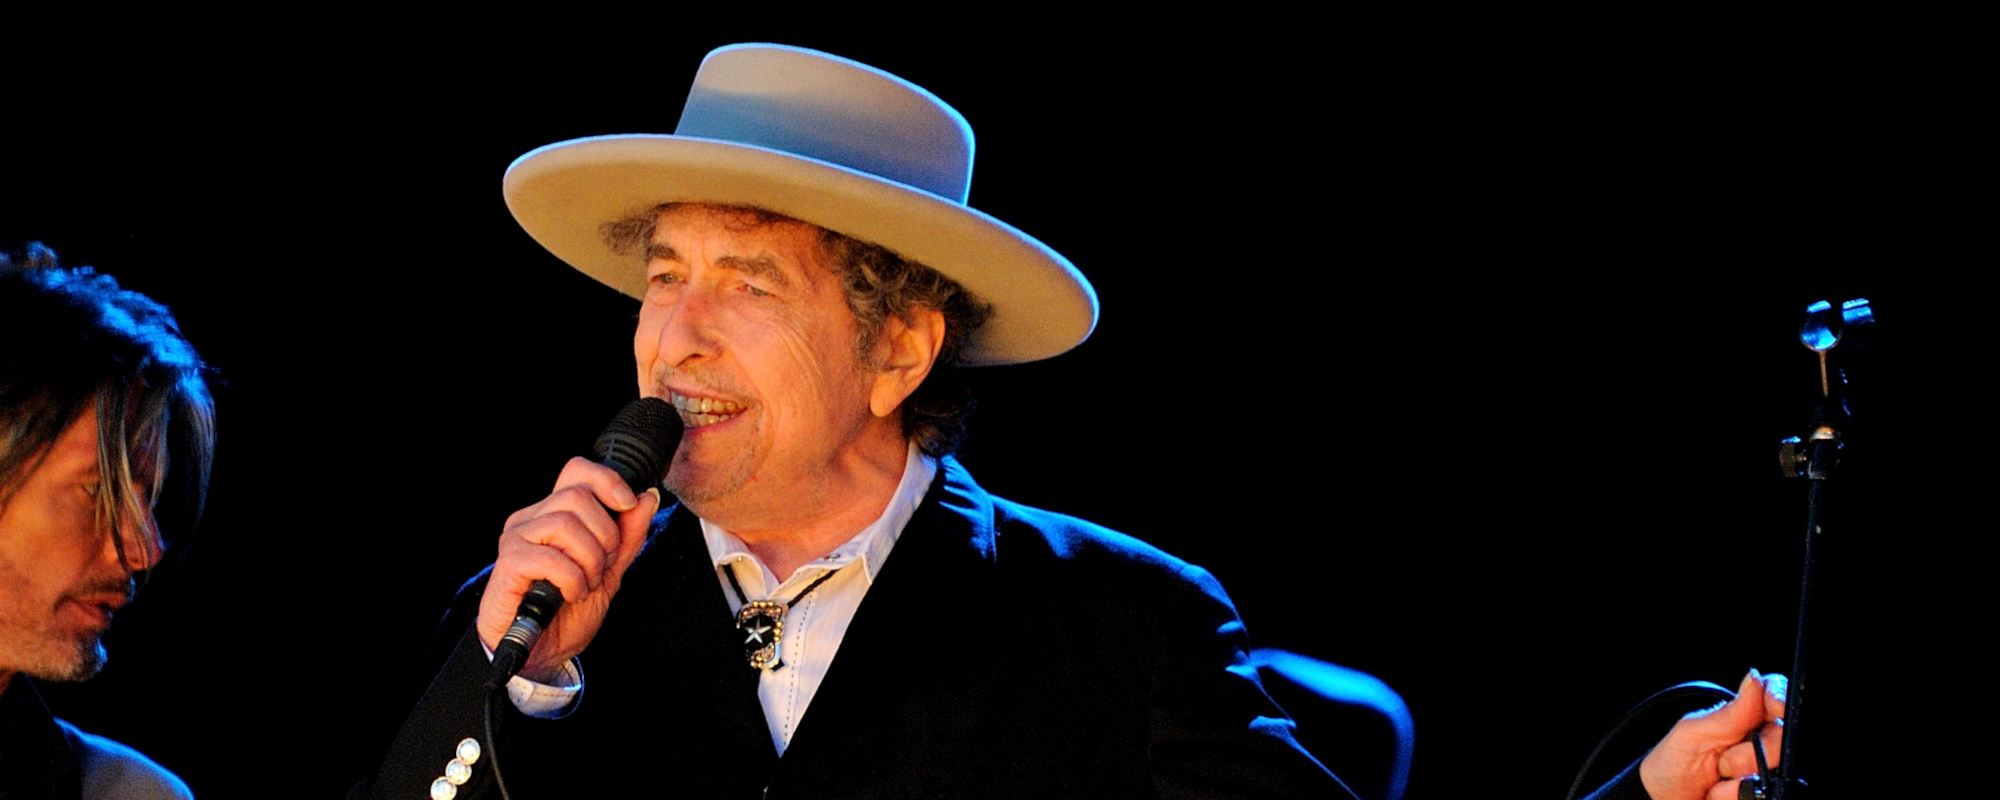 The Time Bob Dylan Stole Dave Van Ronk’s Arrangement for “House of the Rising Sun”